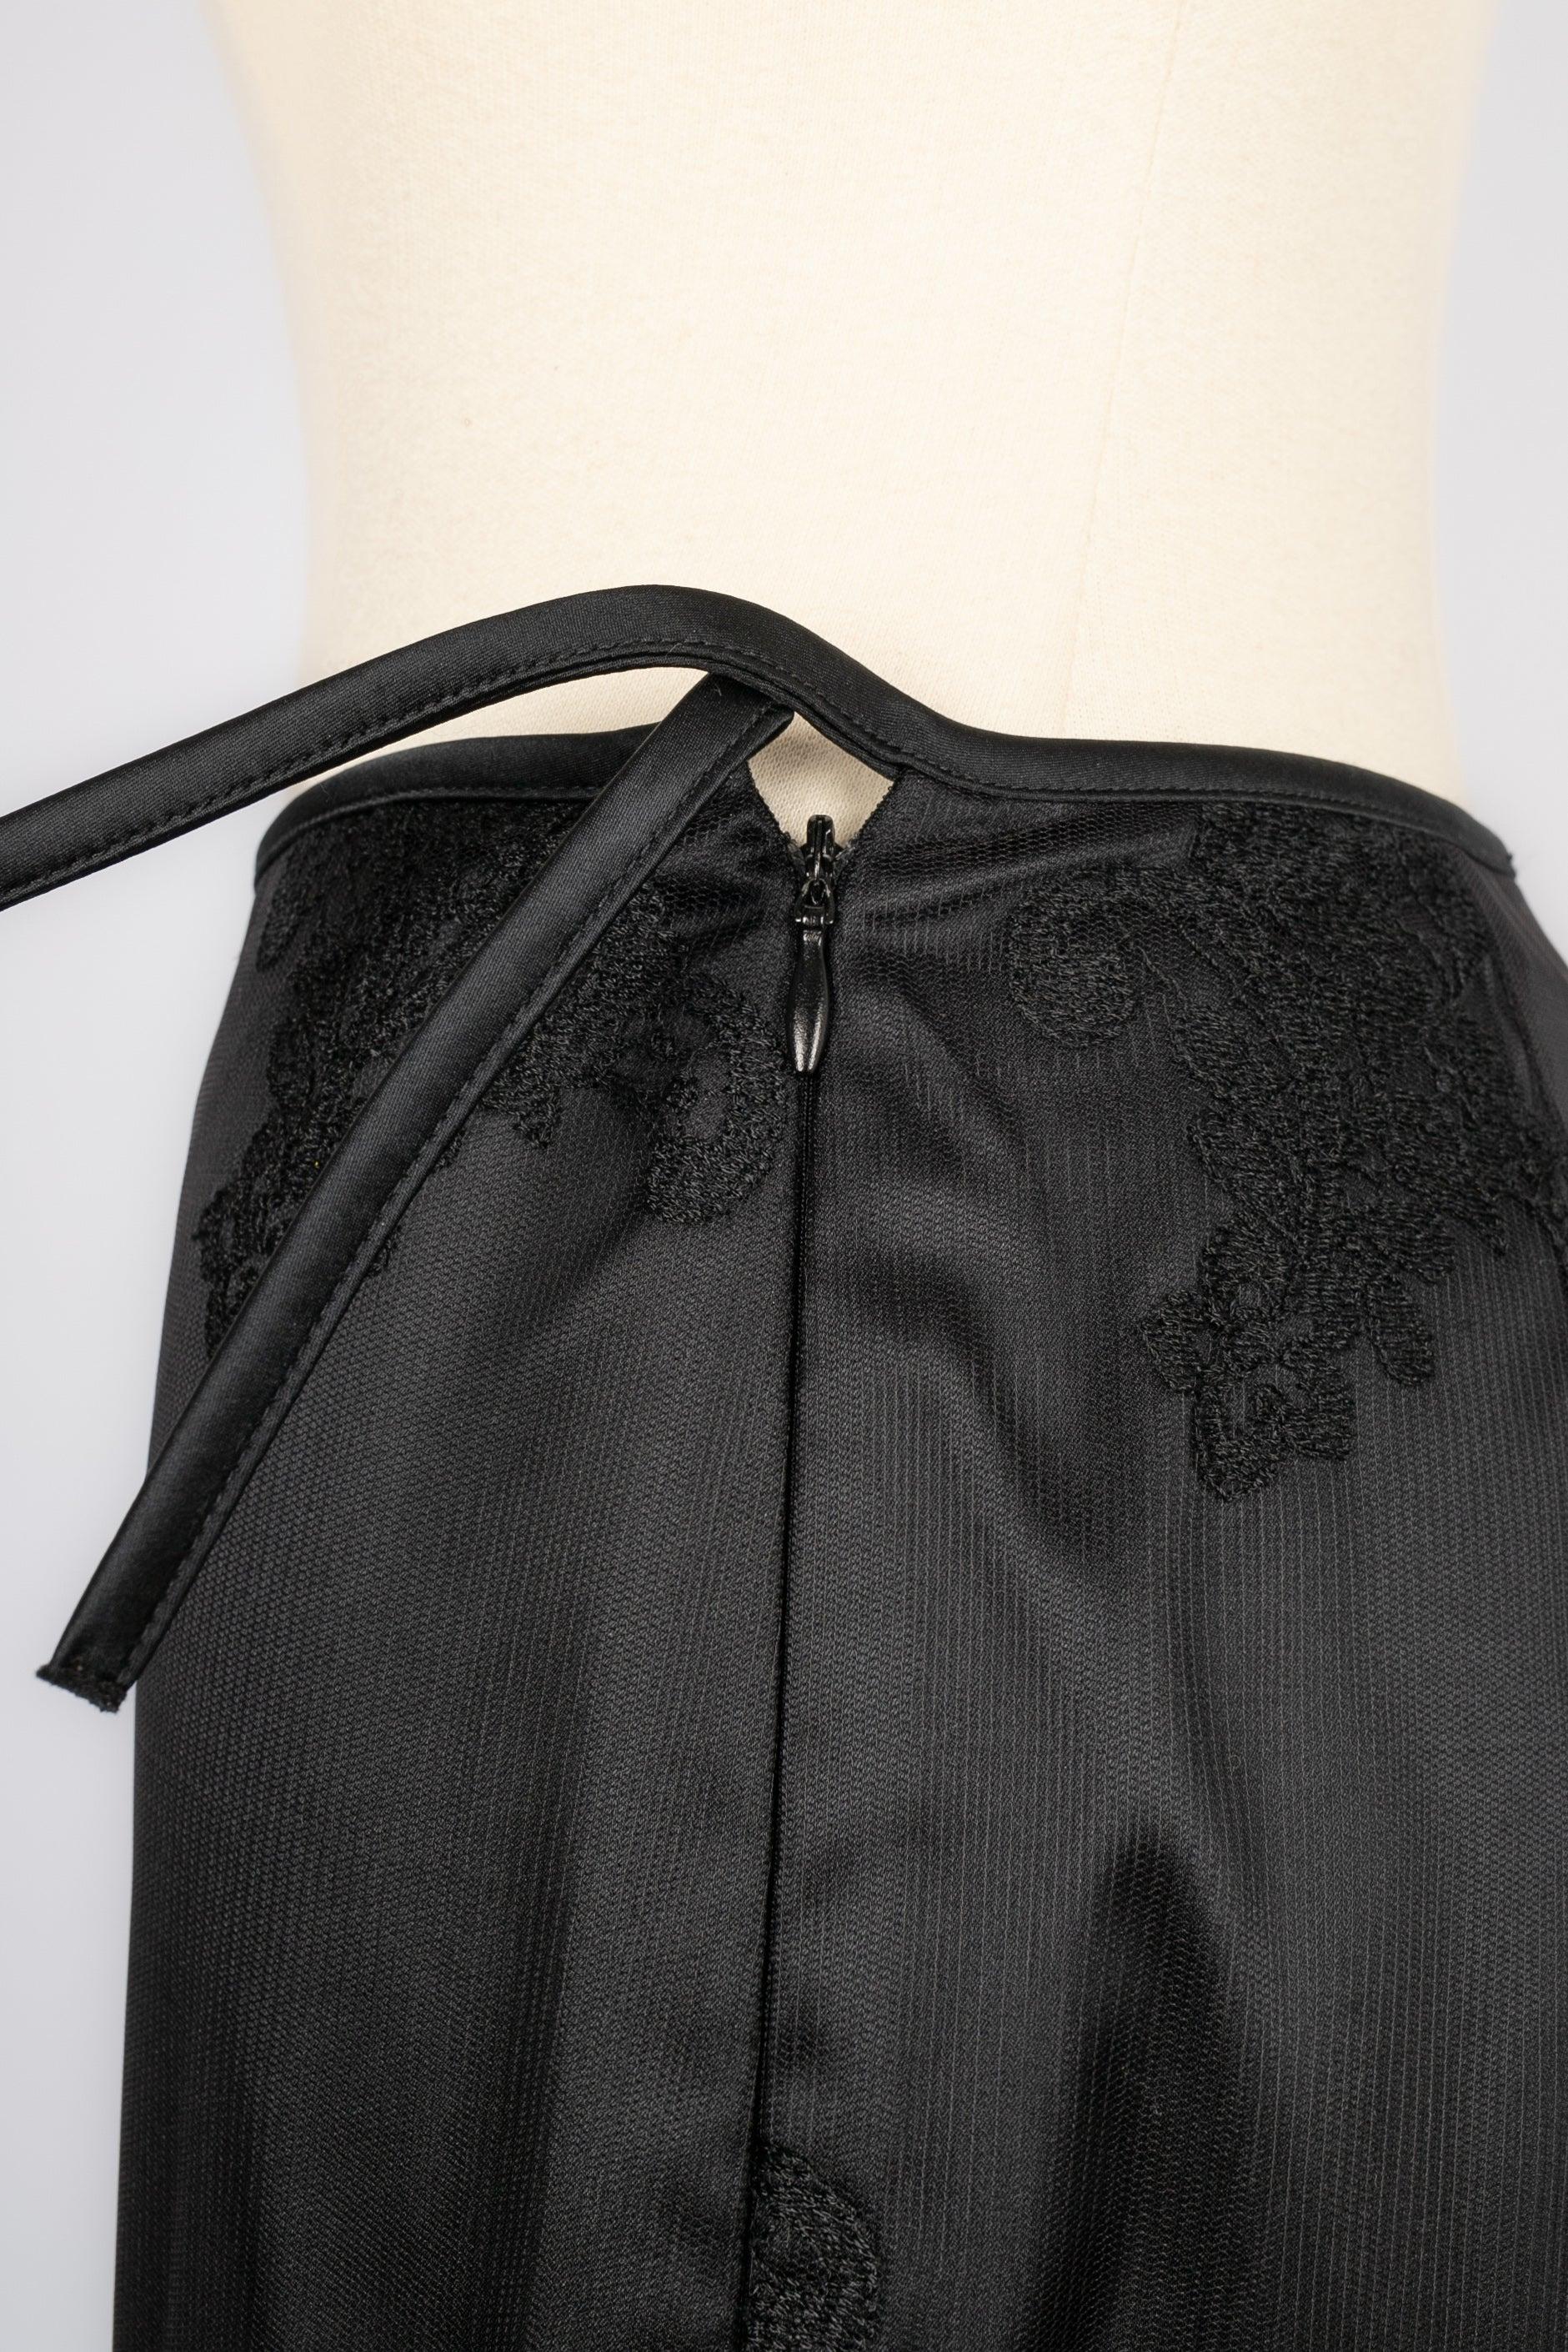 La Perla Black Satin Pants Enlivened with a Tulle Embroidered with Patterns For Sale 2